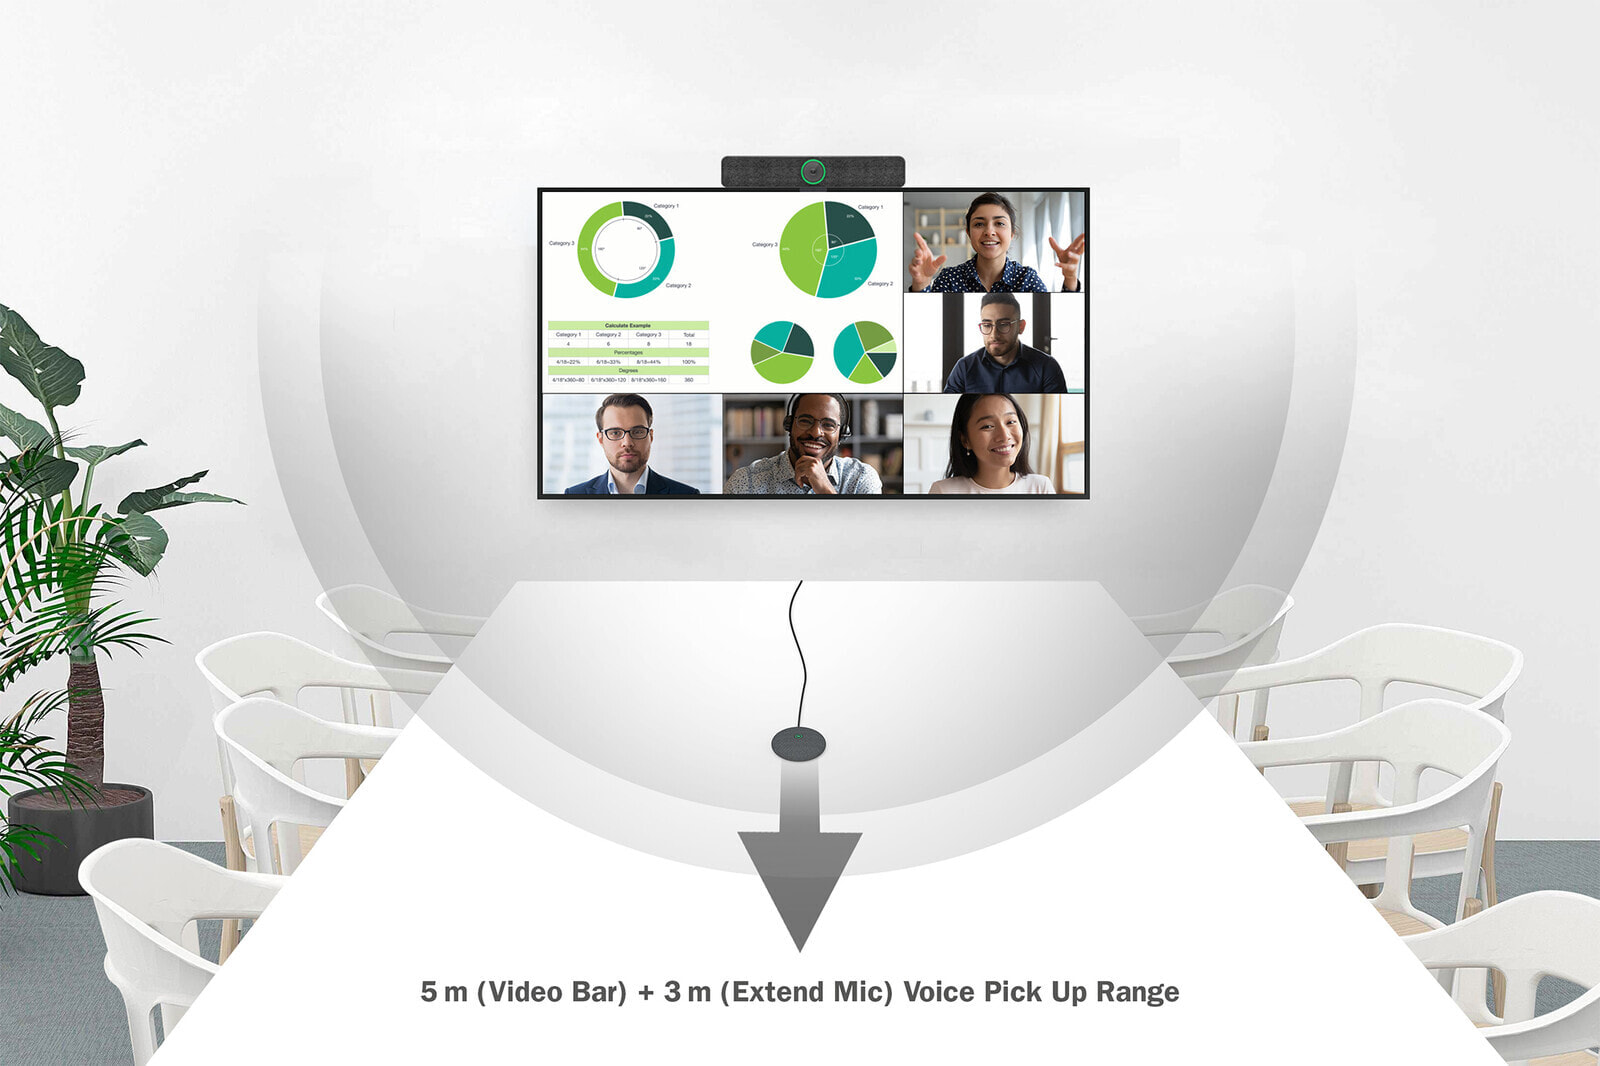 4K All-in-One Video Bar Pro  Video Conference System